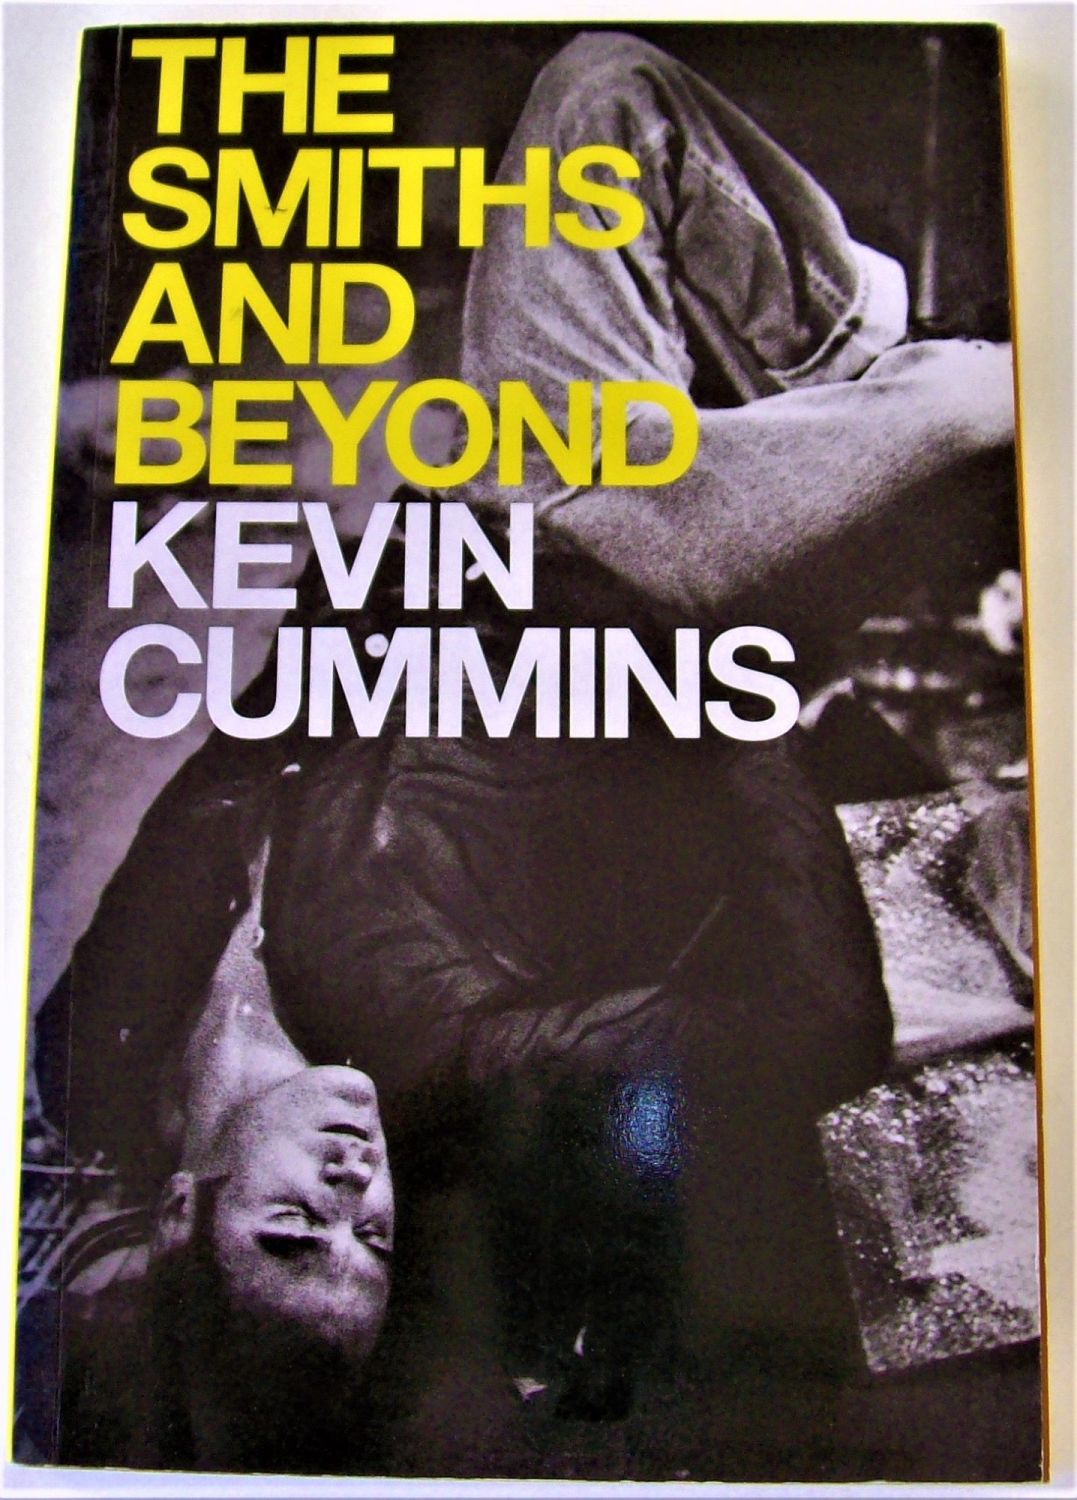 THE SMITHS AND BEYOND REALLY FABULOUS U.K. BOOK 2002 PAPERBACK BY KEVIN CUM